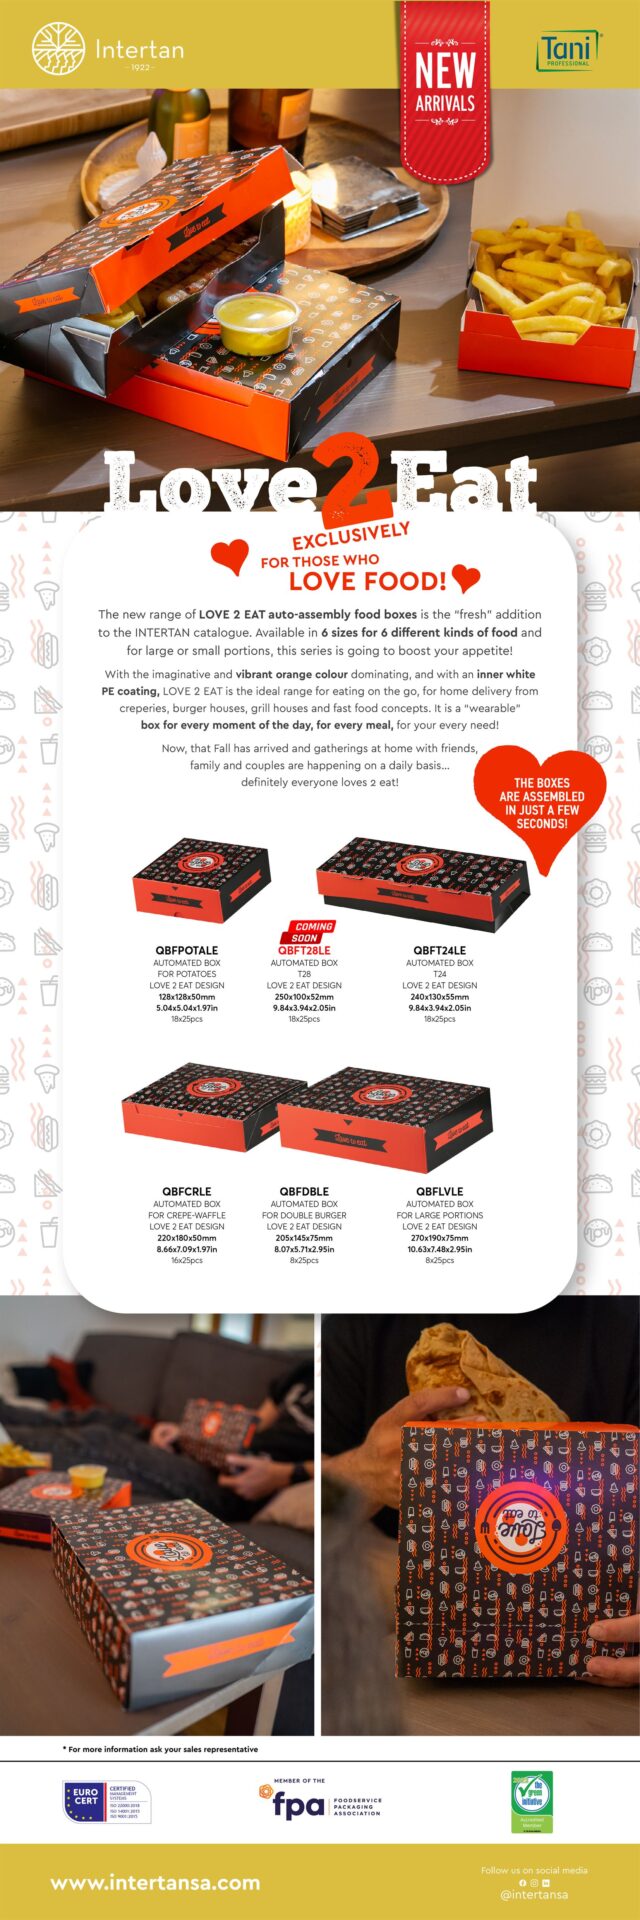 New Auto-assembly Food Boxes "Love 2 Eat" Newsletter | Intertan S.A.